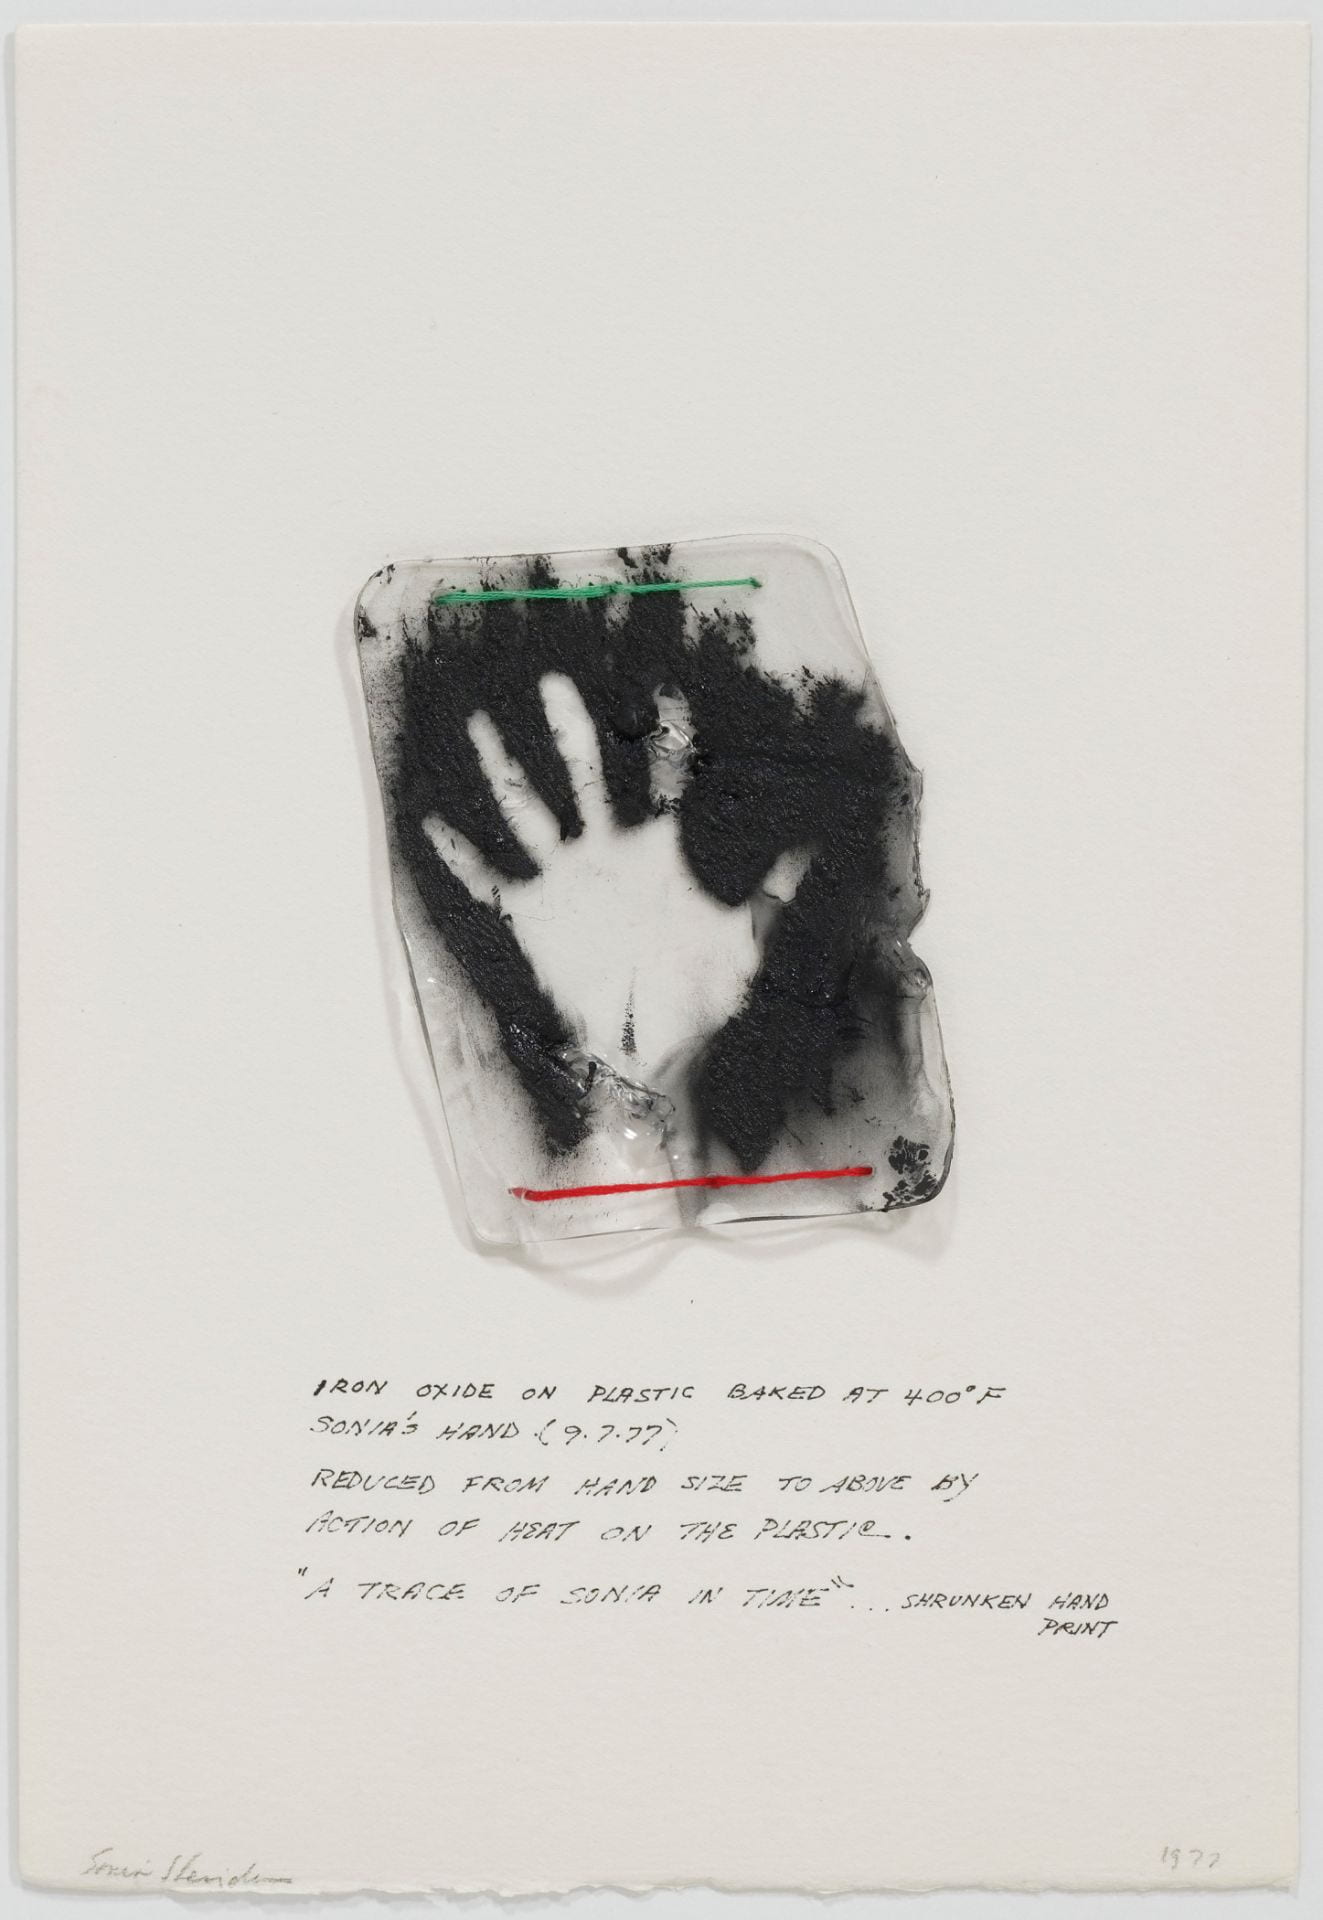 At the center of a white page, the artist has affixed a shrunken plastic replica of her handprint using strands of green and red thread. The handprint appears as a negative, visible as a white print in a cloudlike background of black pigment. Below the fastened object, the artist has inscribed in ink, “IRON OXIDE ON PLASTIC BAKED AT 400 [degree symbol] F / SONIA’S HAND (97.77) / REDUCED FROM HAND SIZE TO ABOVE BY / ACTION OF HEAT ON THE PLASTIC. / ‘A TRACE OF SONIA IN TIME’ . . . SHRUNKEN HAND PRINT.”